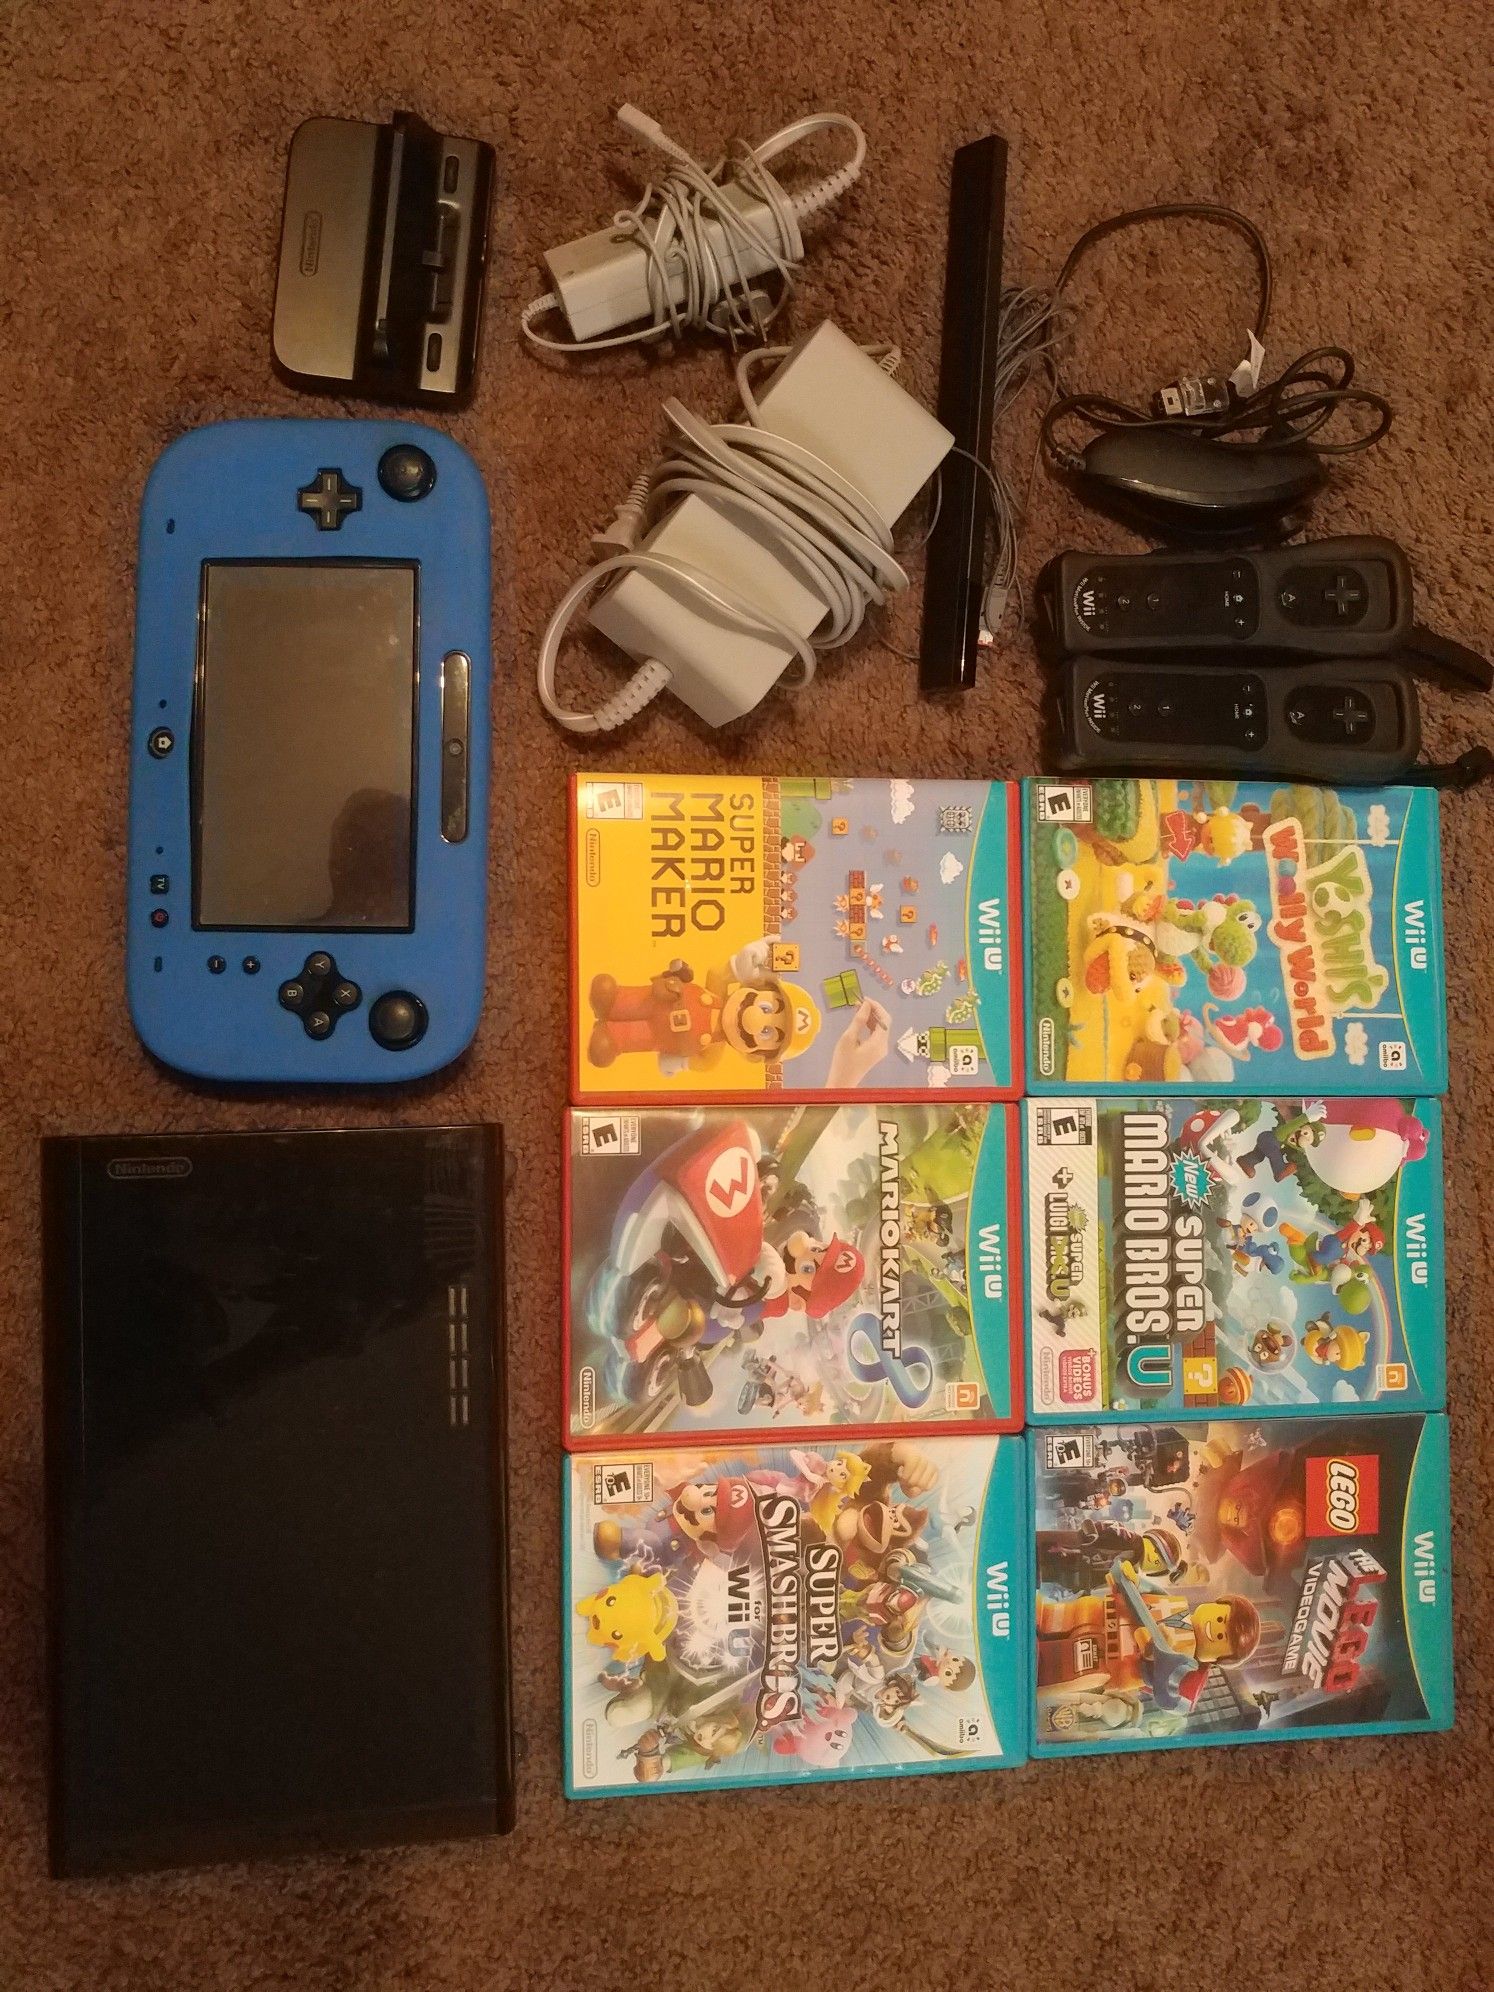 Nintendo Wii U Black Console 32GB Bundle + 6 Games, 3 controllers + a nunchuck & all controllers with covers.